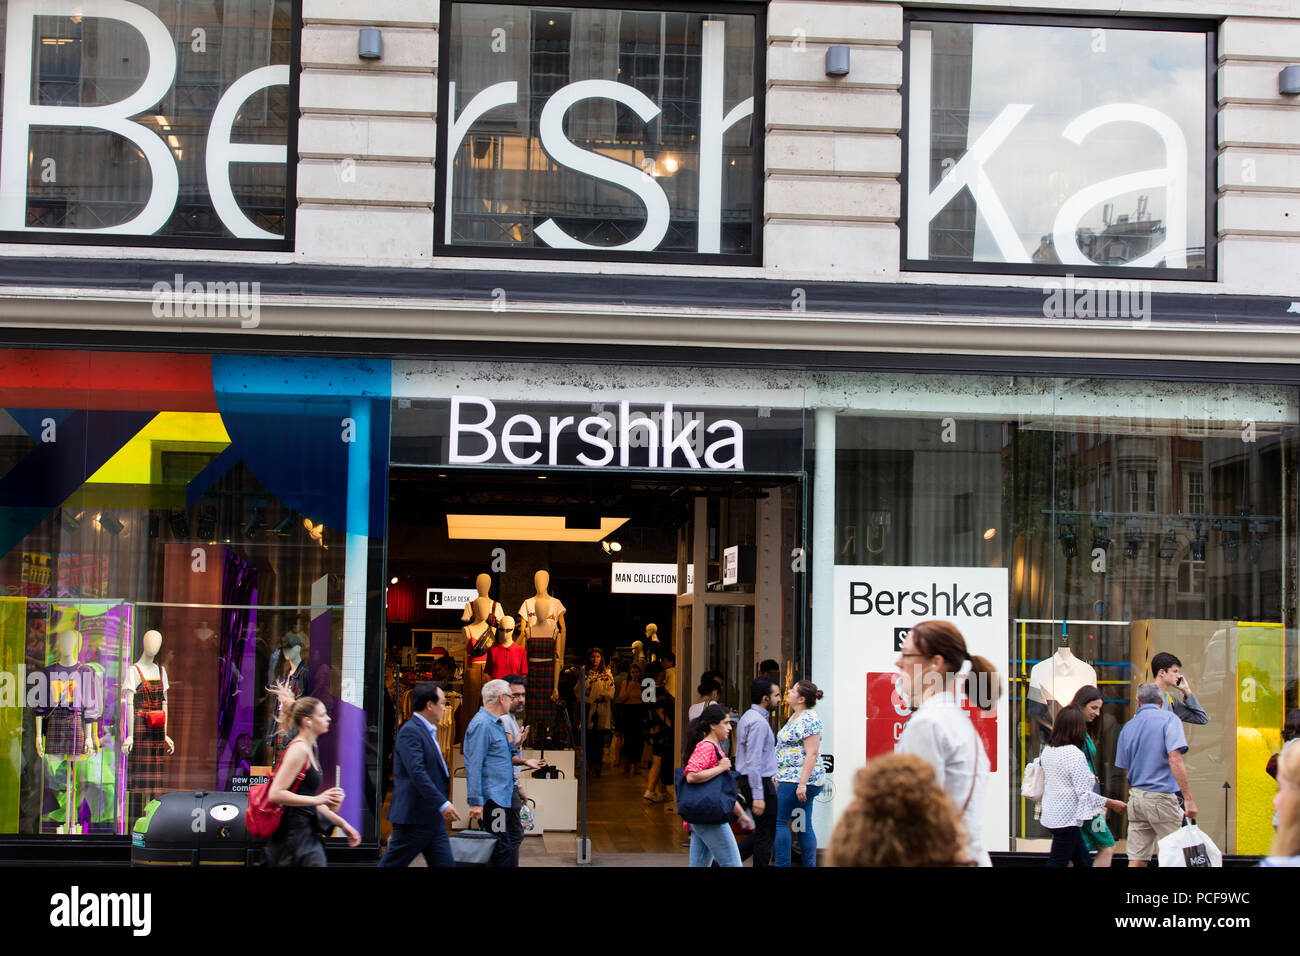 LONDON, UK - JULY 31th 2018: Bershka clothing store shop front on Oxford St...